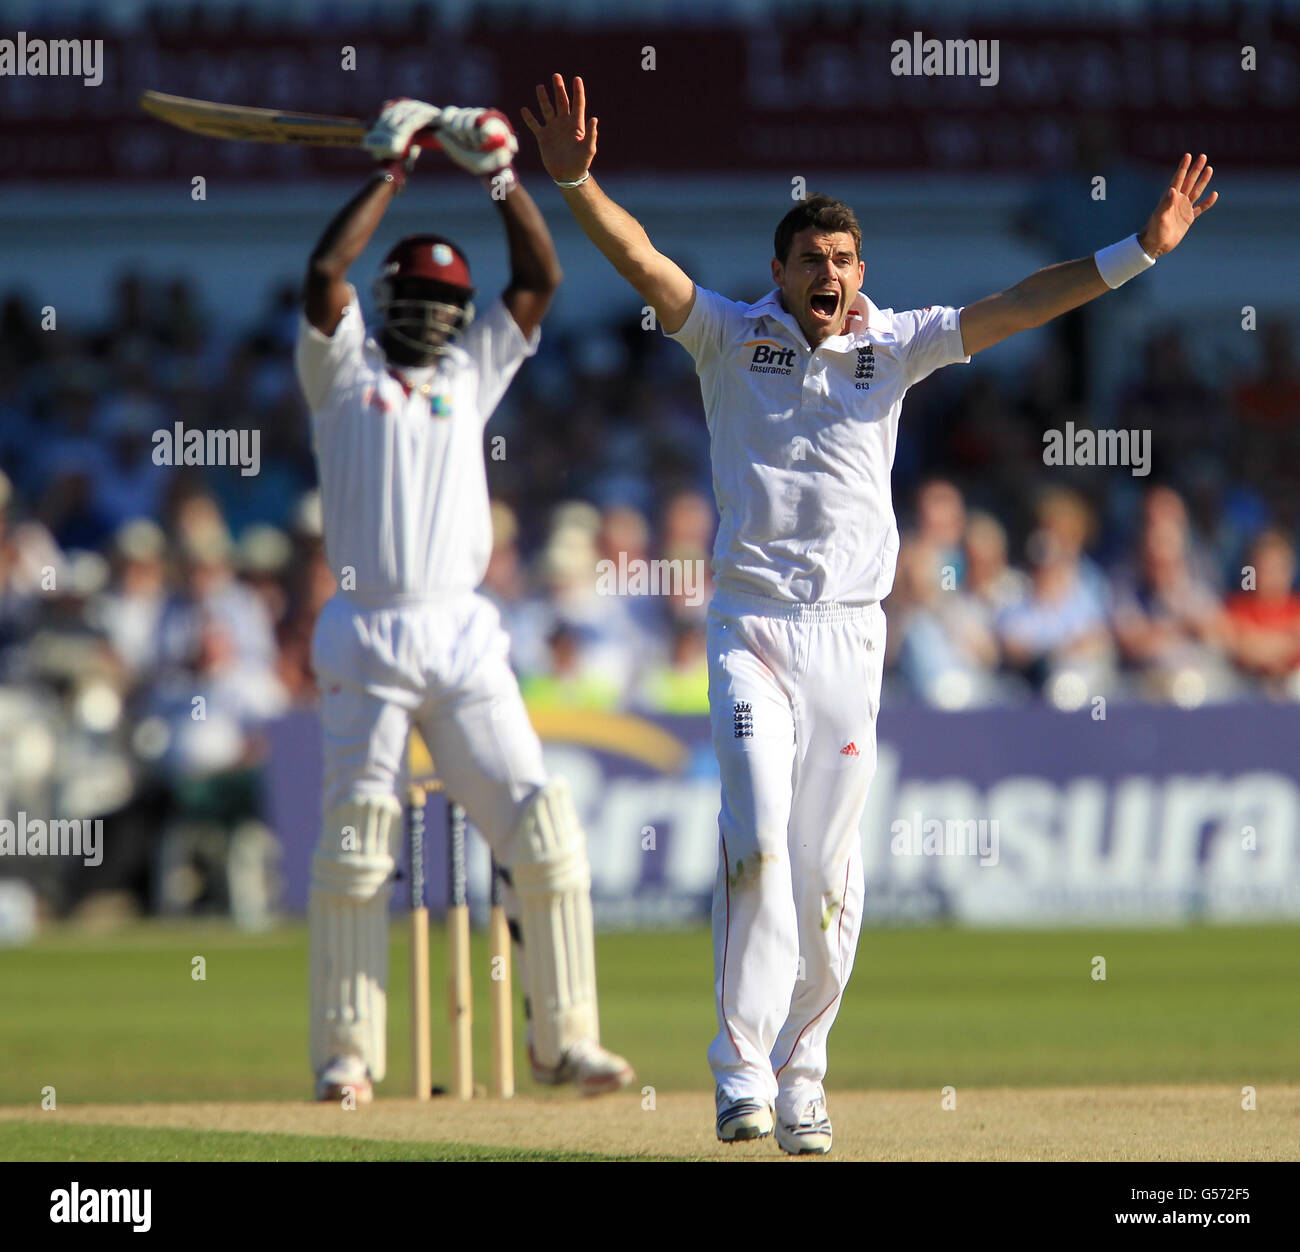 England's James Anderton appeals for the wicket of the wicket of West Indies' Darren Sammy Stock Photo